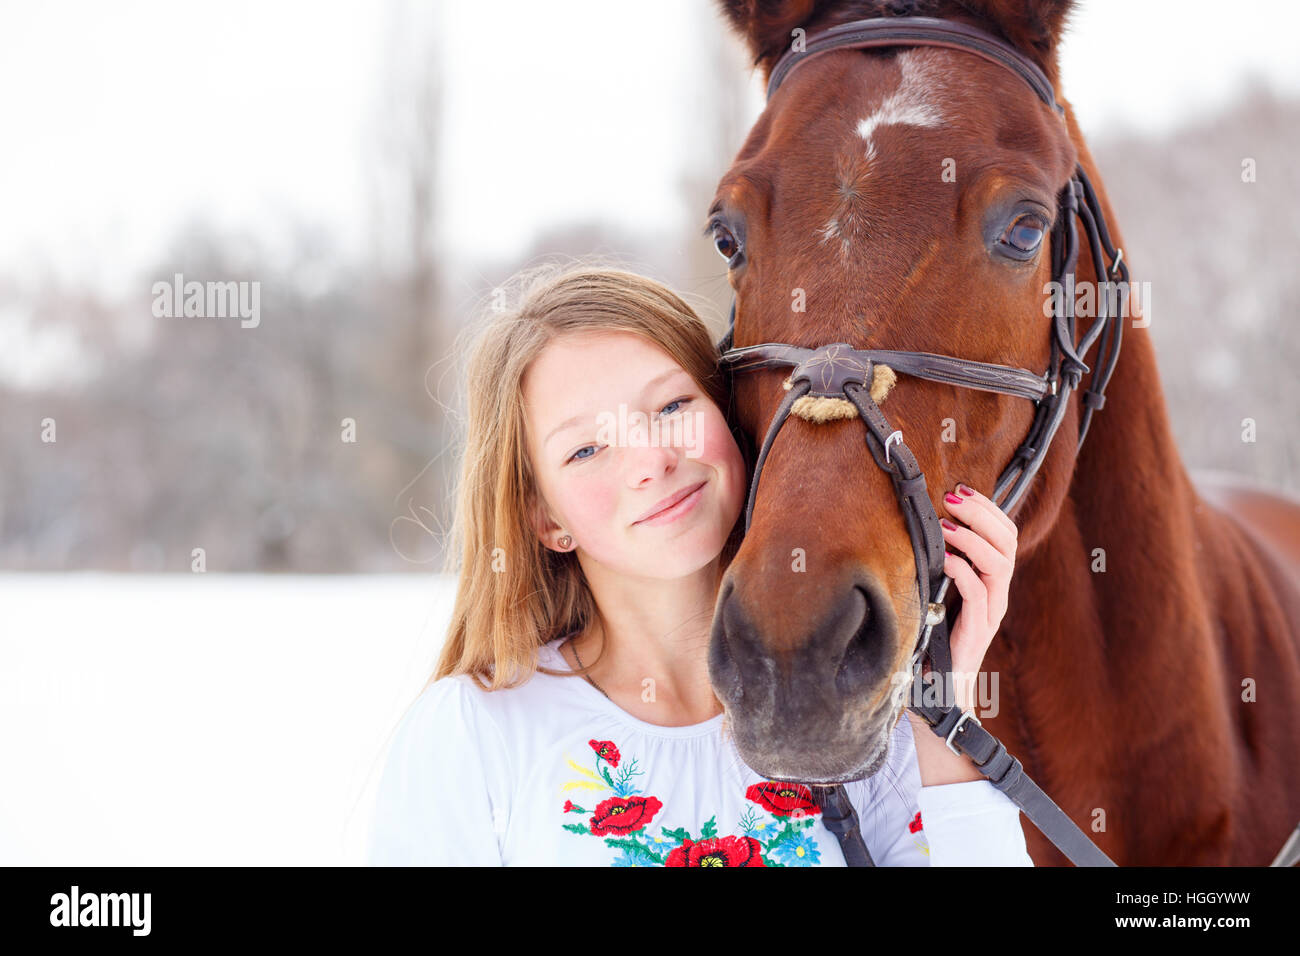 Young smiling girl enjoying friendship with horse Stock Photo